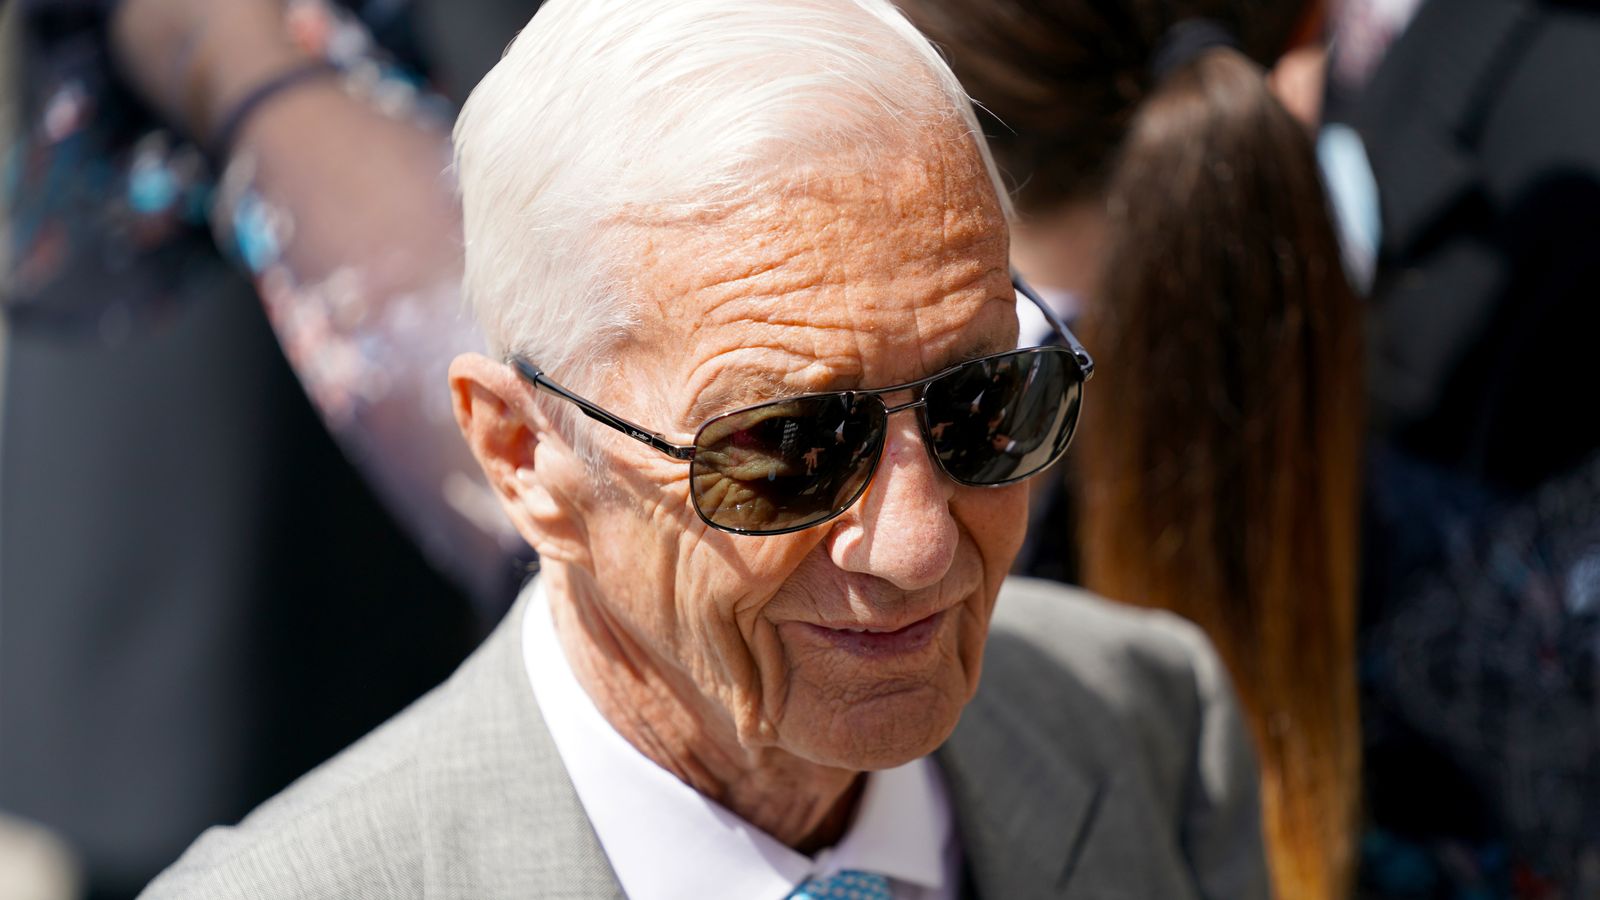 Lester Piggott dies aged 86: Horseracing mourns the loss of a colossus with an iron will to win